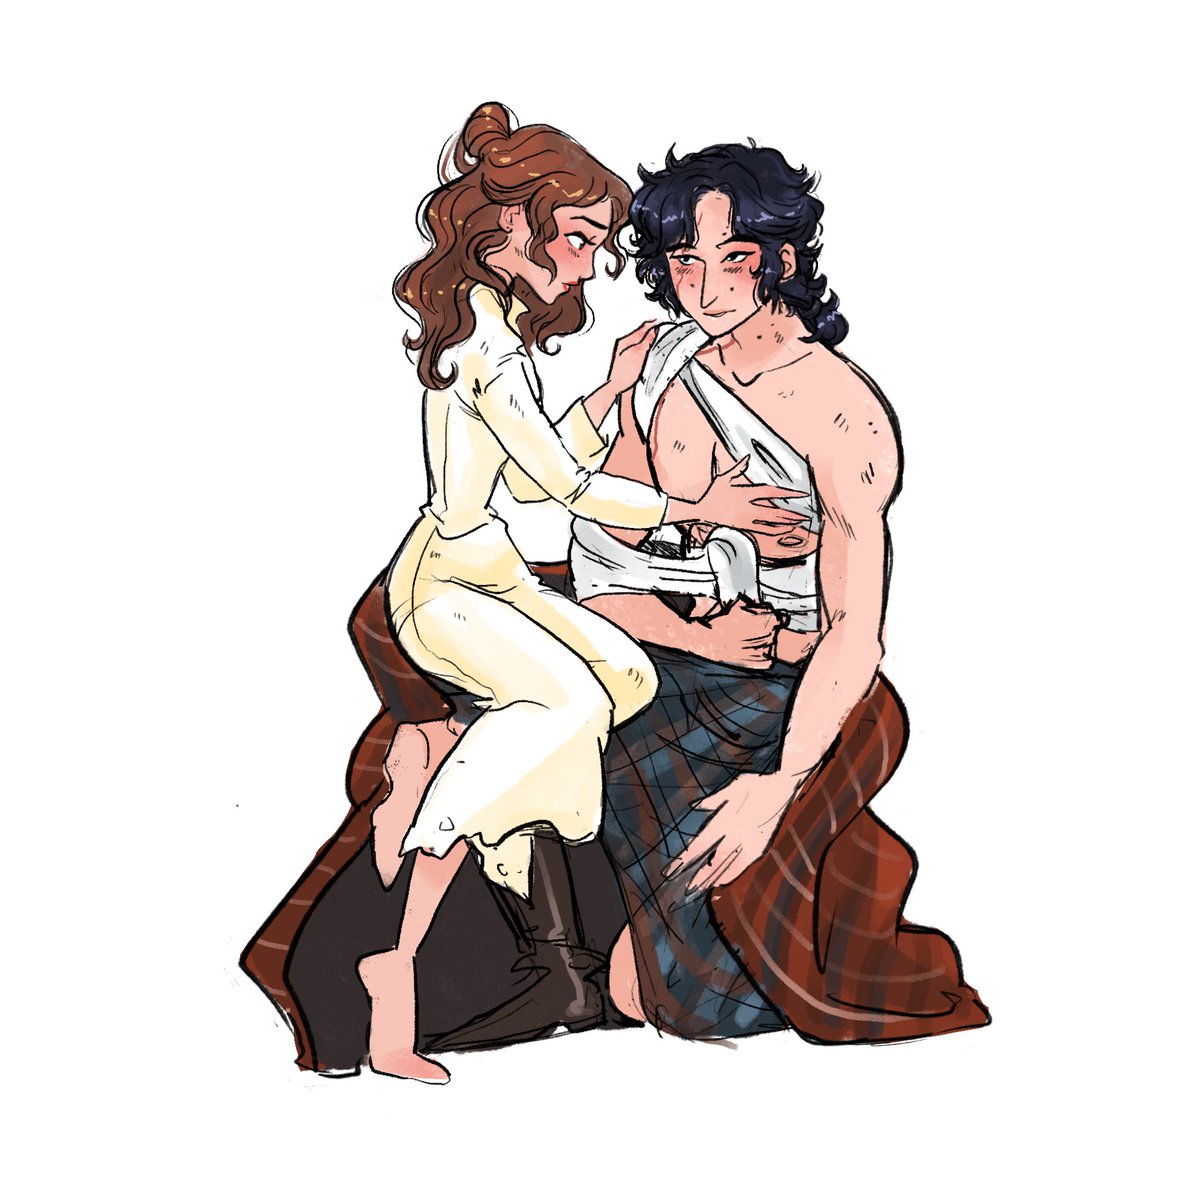 Reylo Outlander Au. because why not.